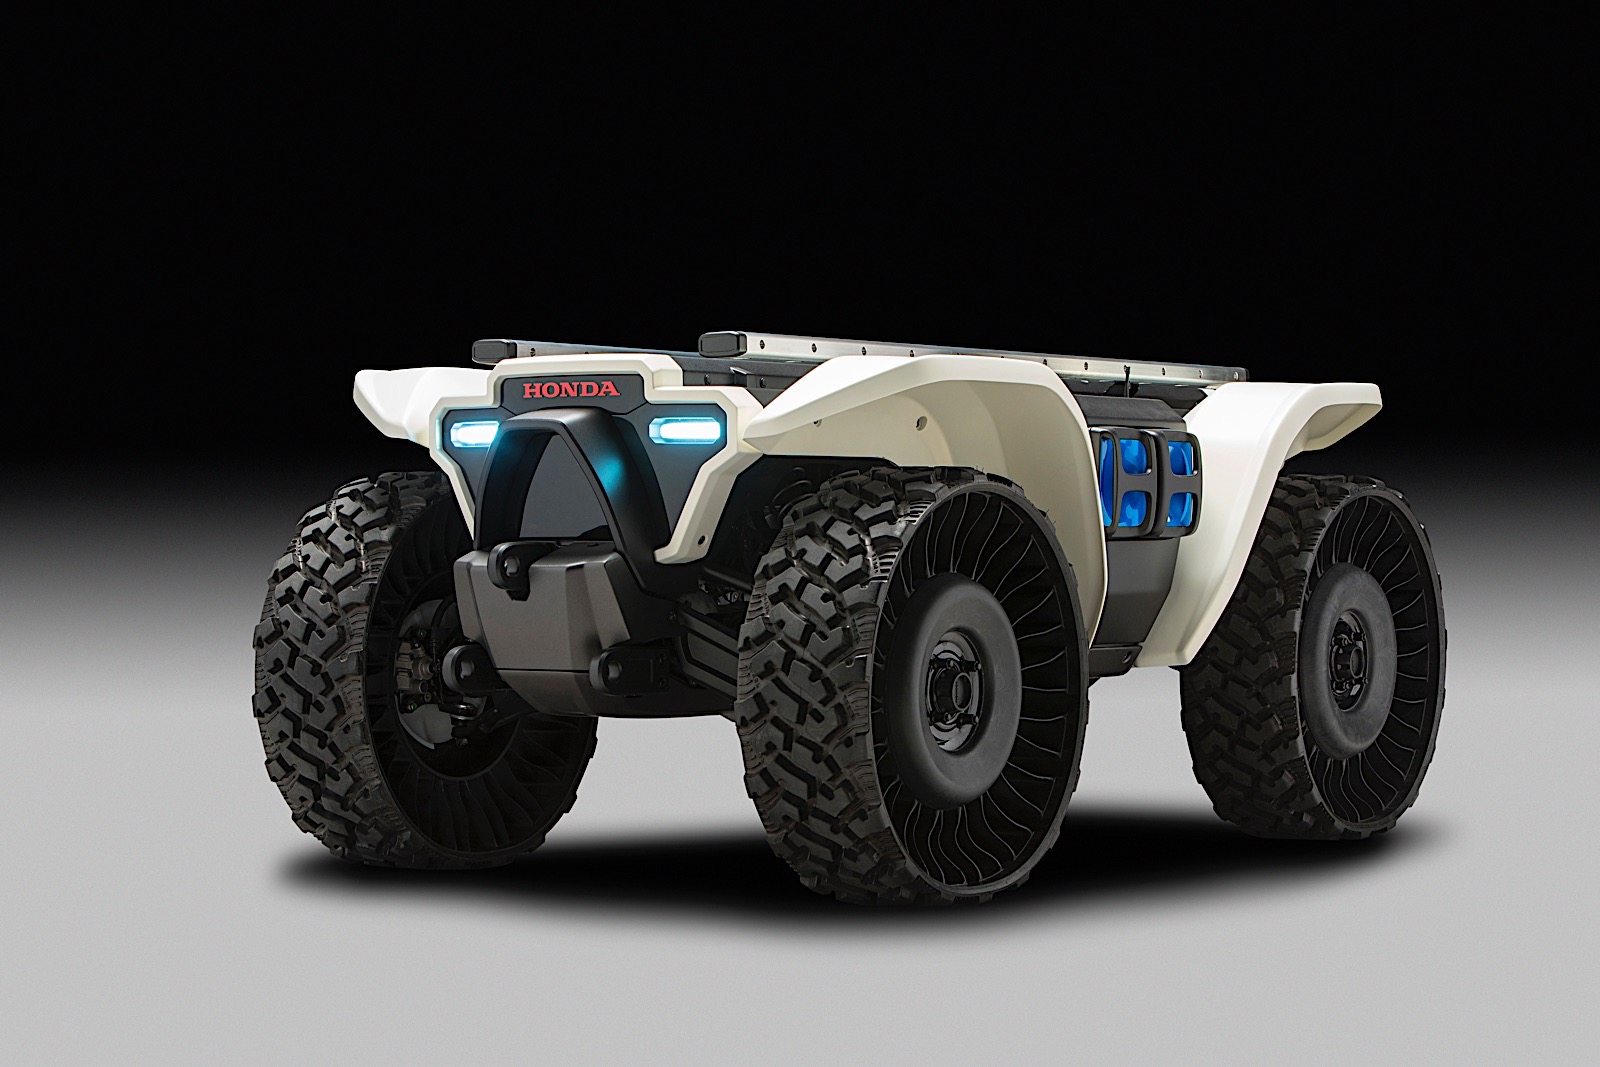 Hondaâ€™s 3E-D18 is an autonomous off-road robotic device with AI designed to support people in a broad range of work activities.